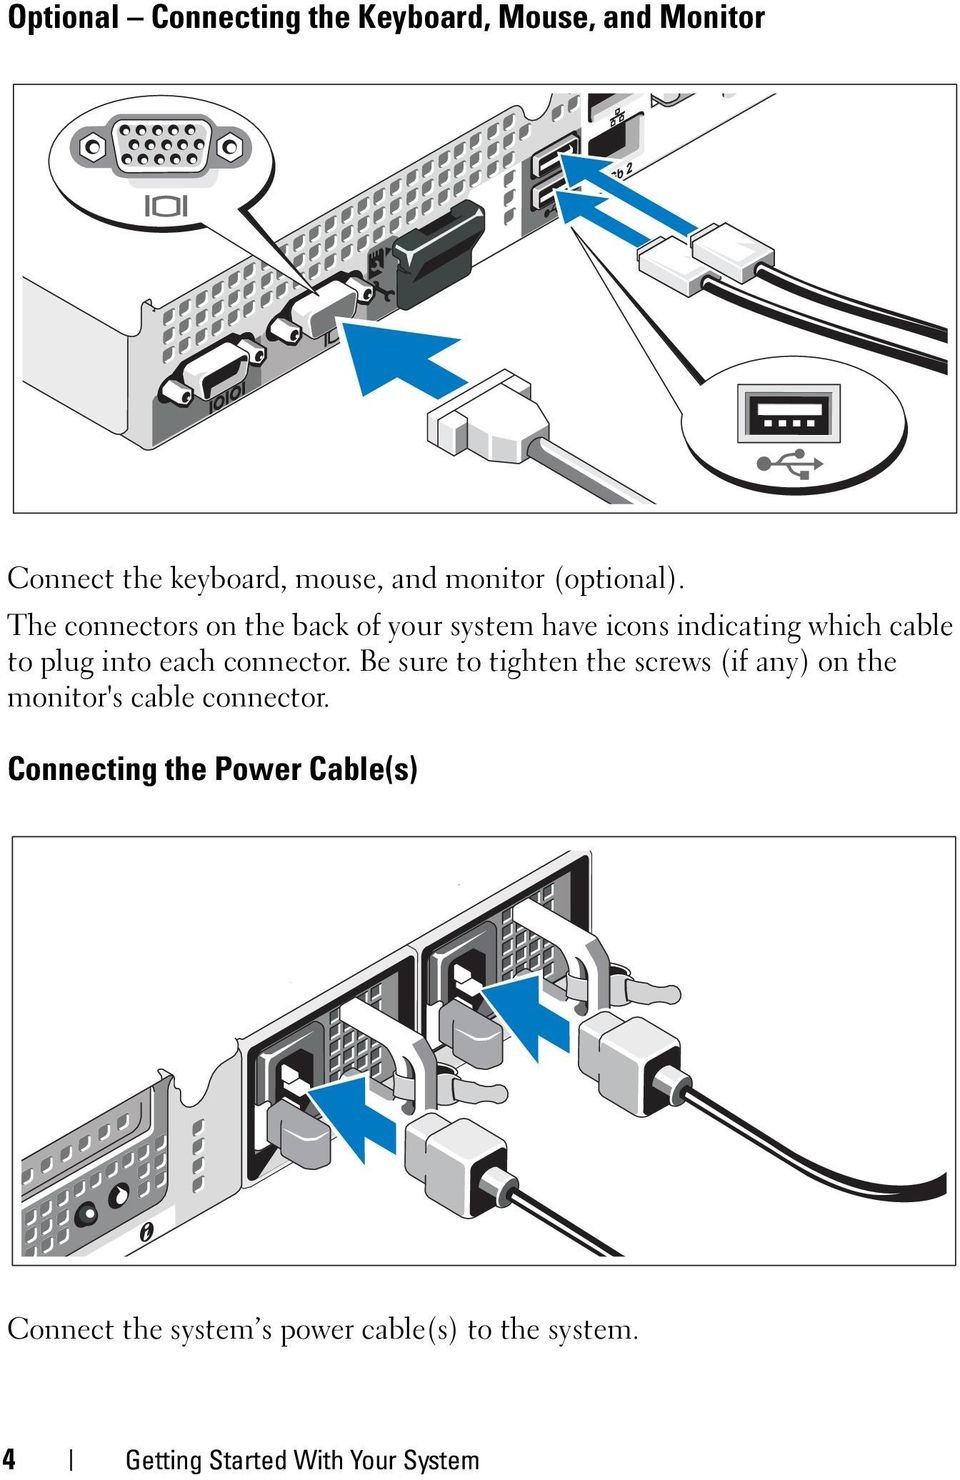 The connectors on the back of your system have icons indicating which cable to plug into each